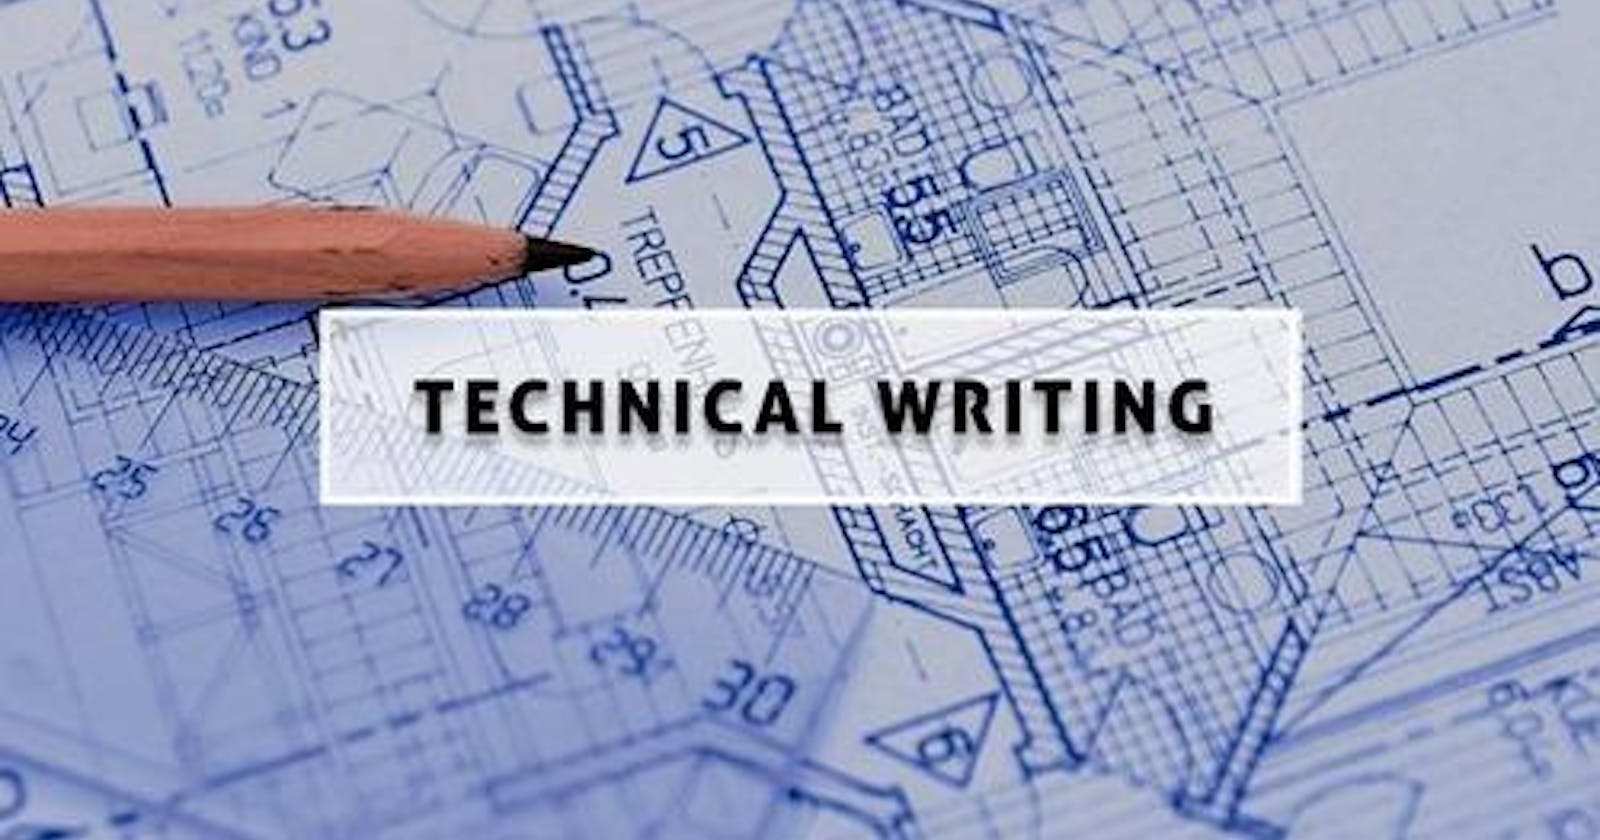 Technical Writing 101:  Technical Writing Ultimate Guide.